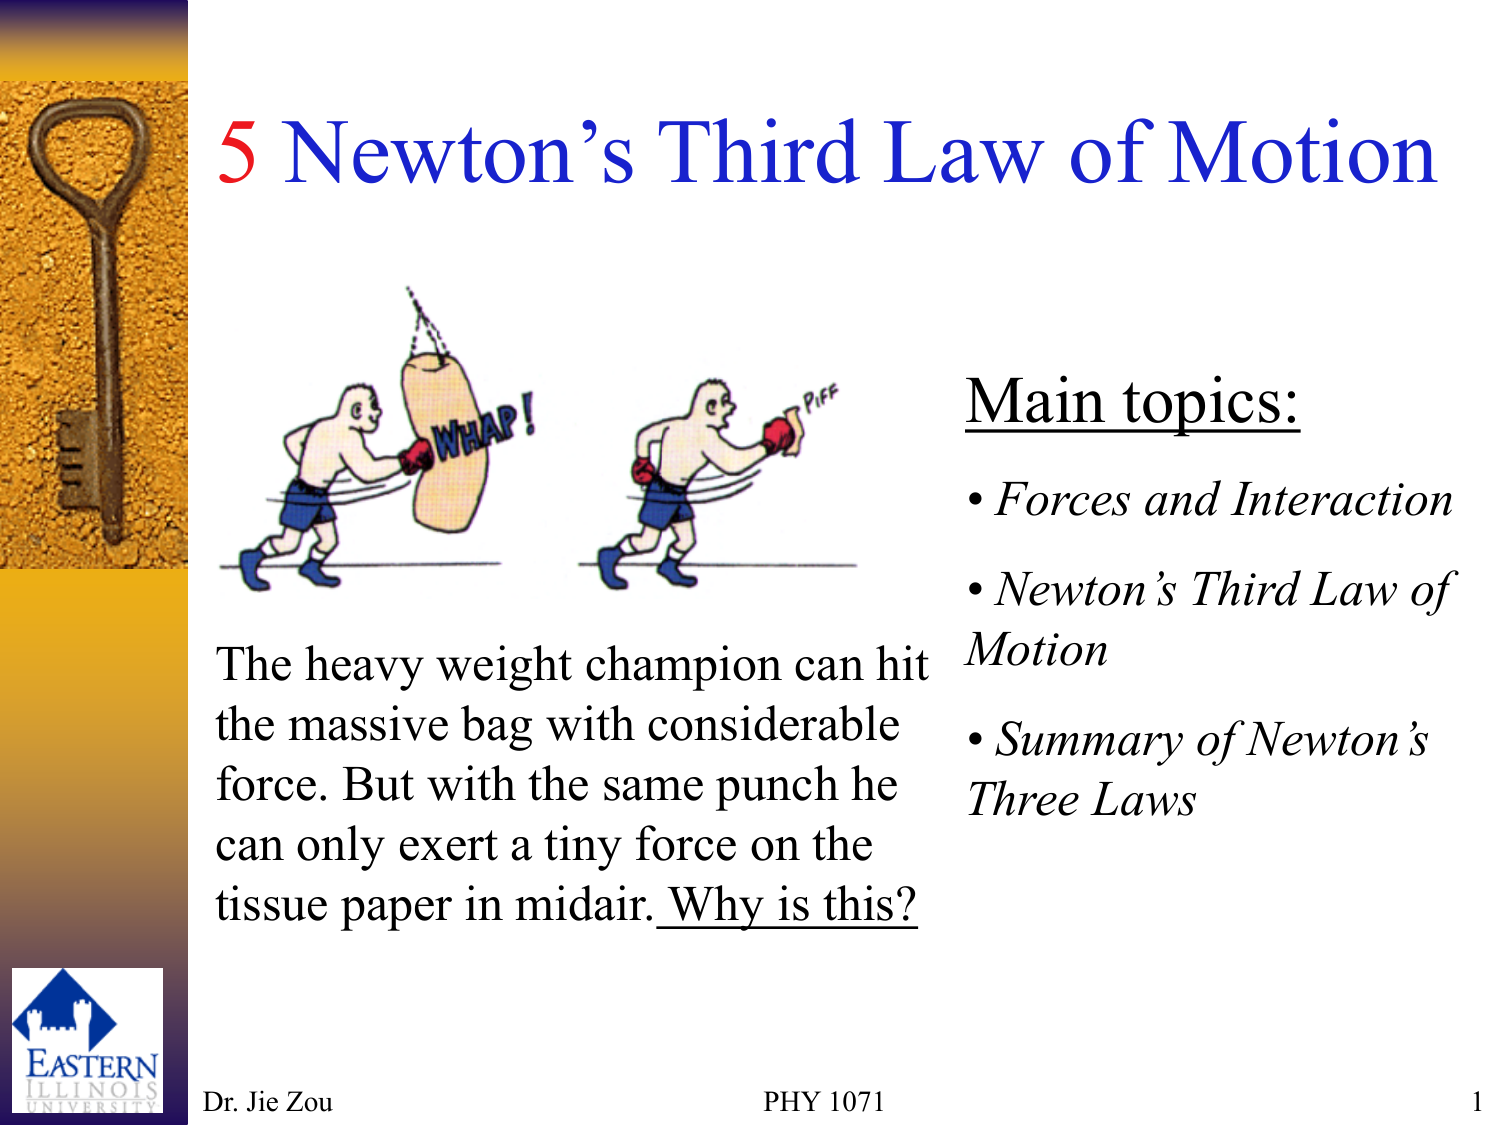 newtons 3rd law of motion